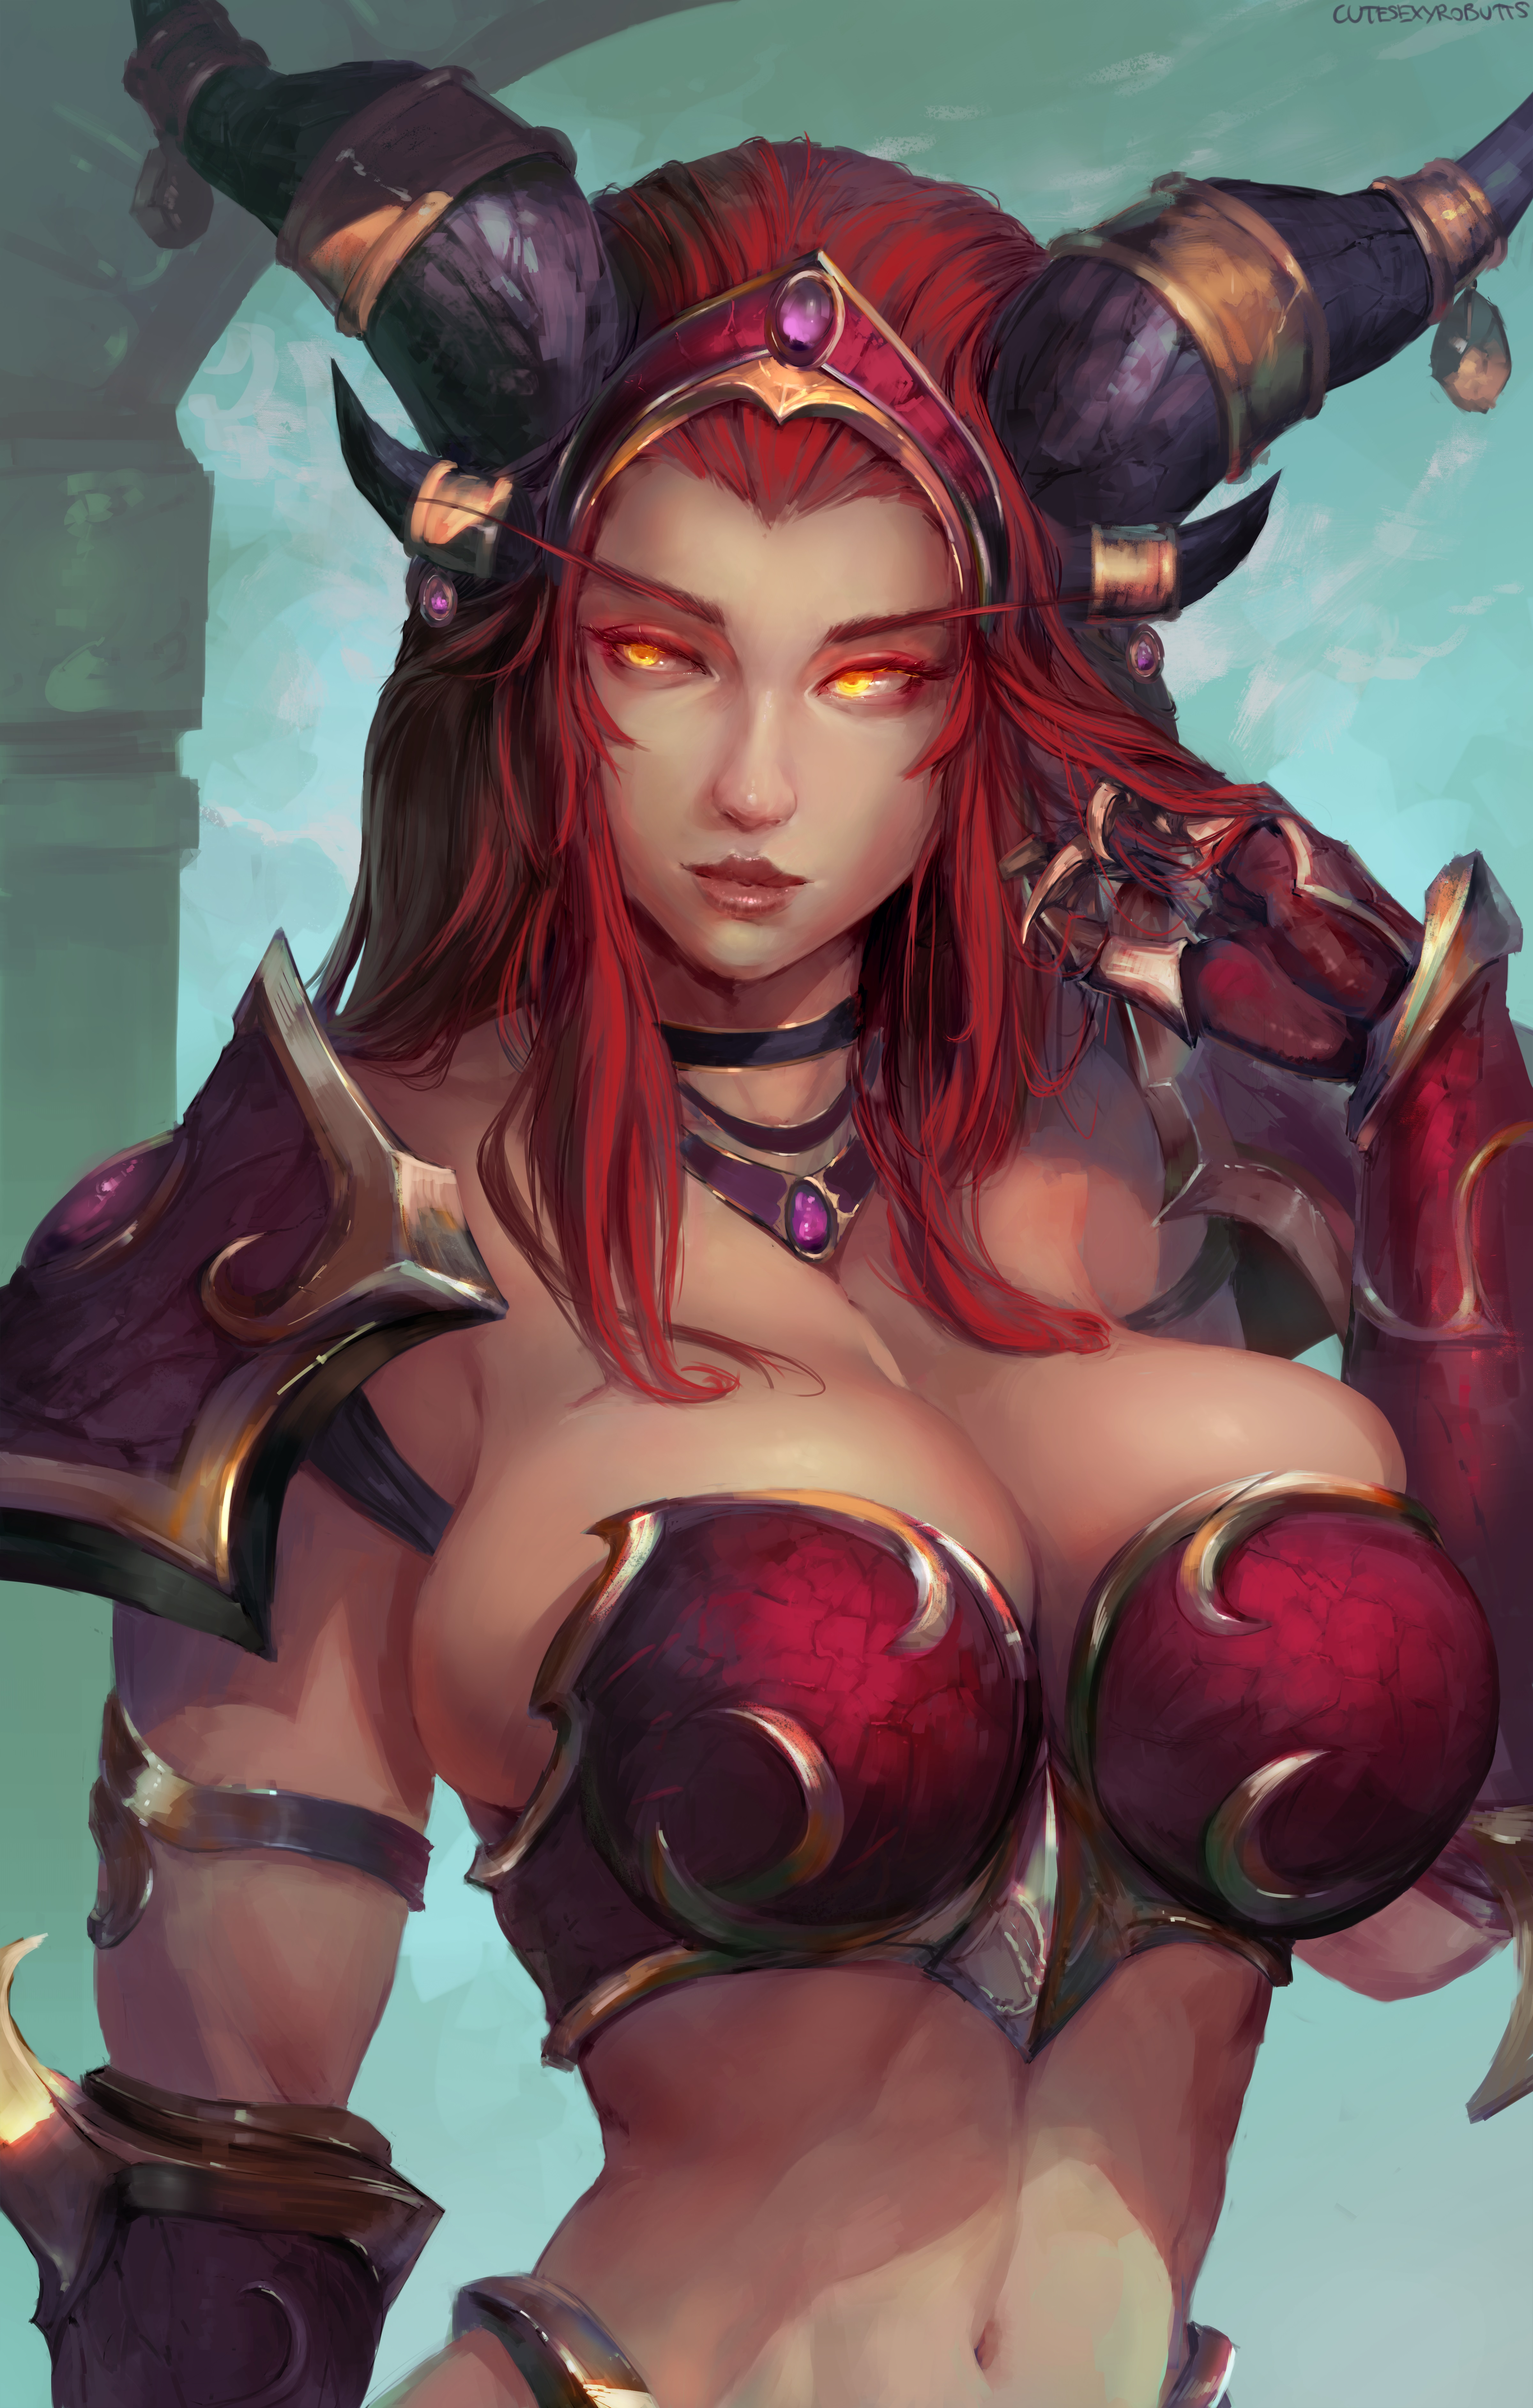 General 4800x7542 Alexstrasza World of Warcraft video games video game girls fantasy girl redhead glowing eyes armor huge breasts looking at viewer horns 2D artwork drawing illustration fan art Cutesexyrobutts